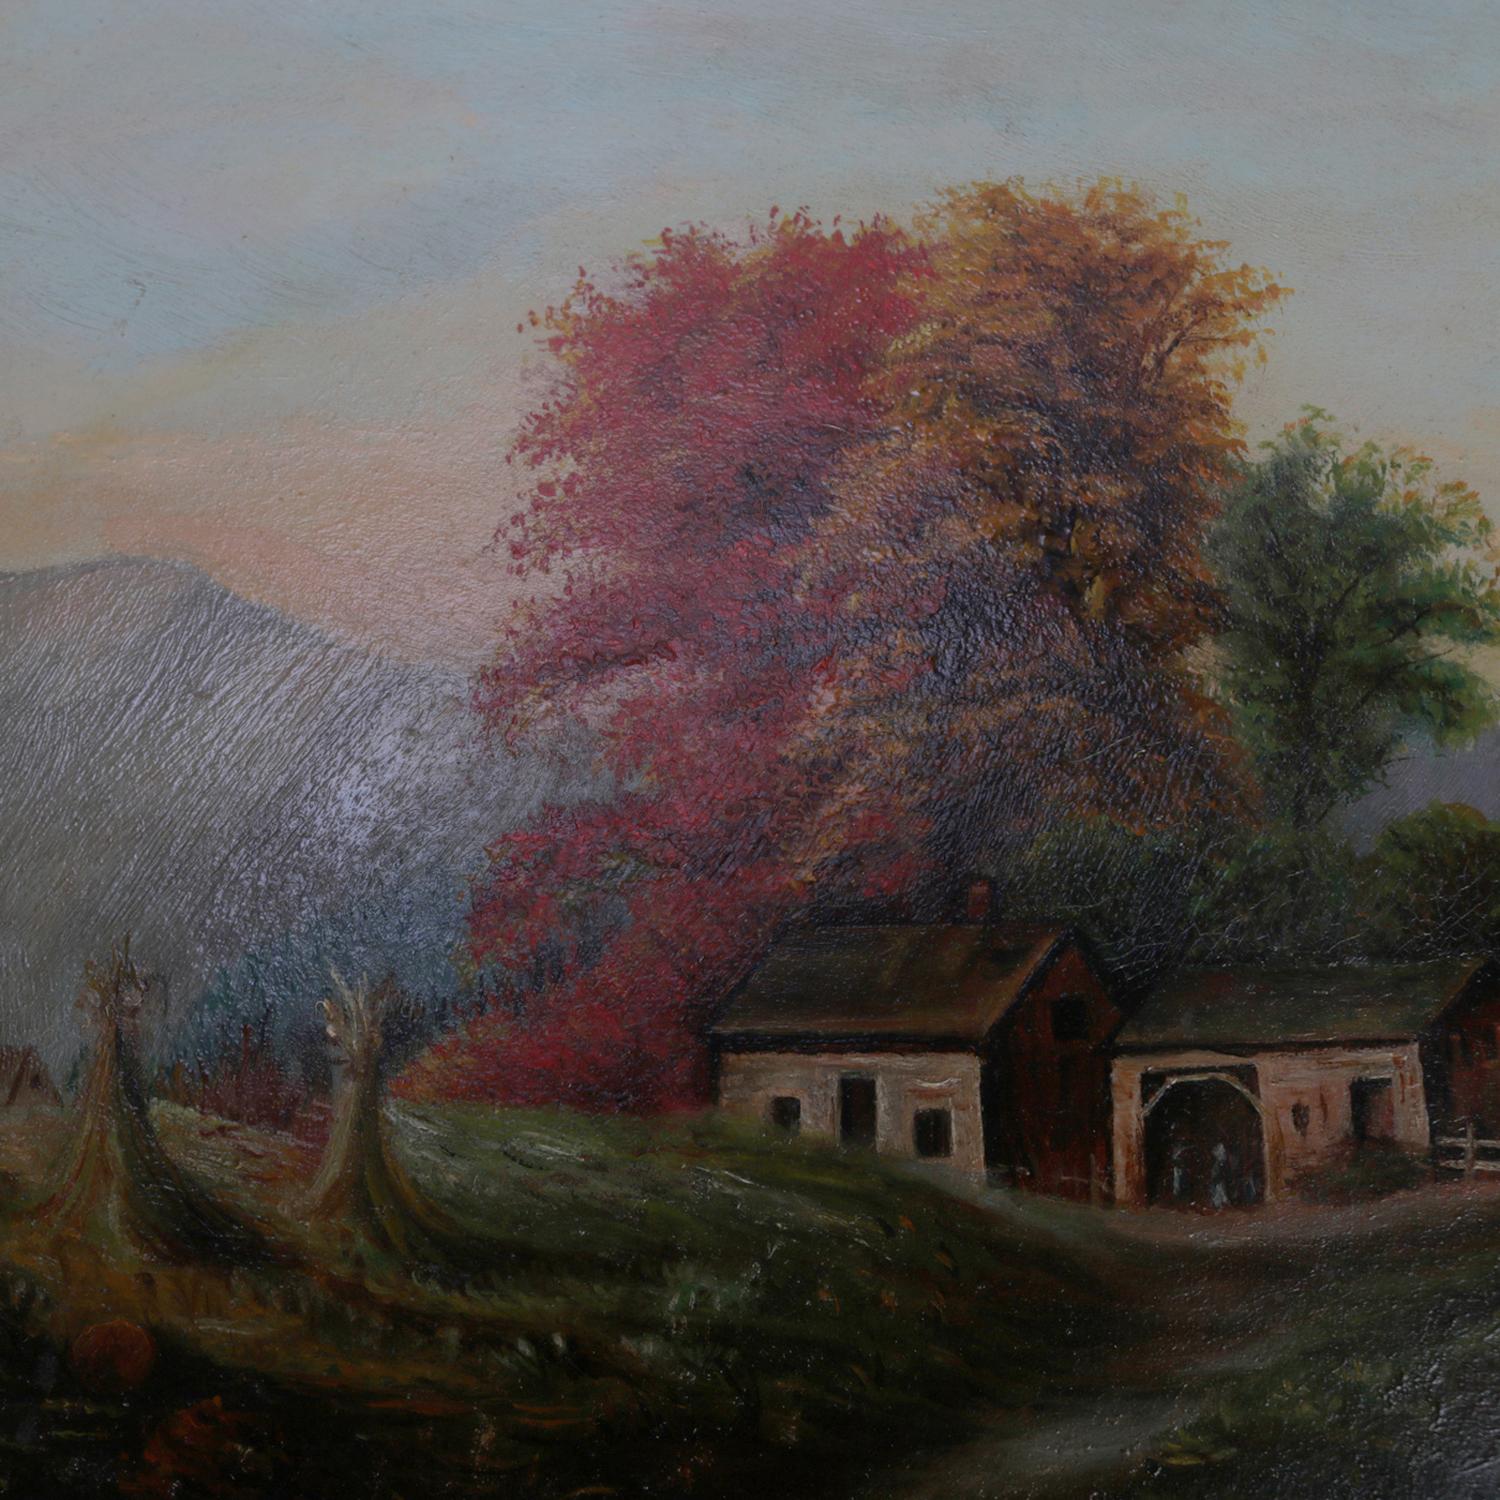 American Antique Folk Art Oil on Board Landscape Painting with Farm, 20th Century